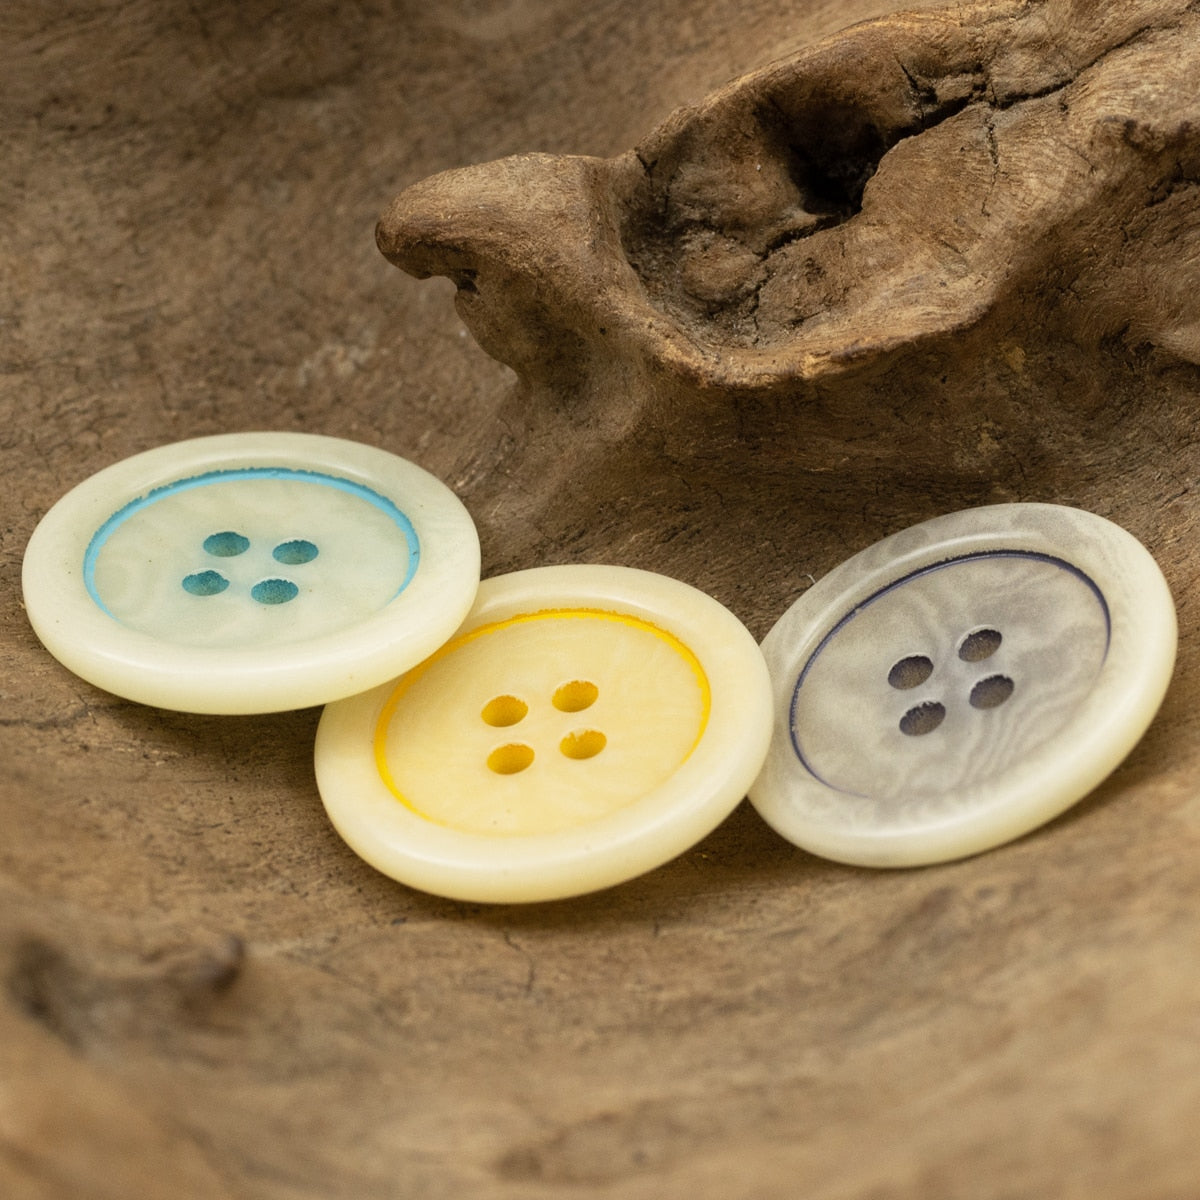 6pcs Summer Style Genuine Natural Corozo Buttons